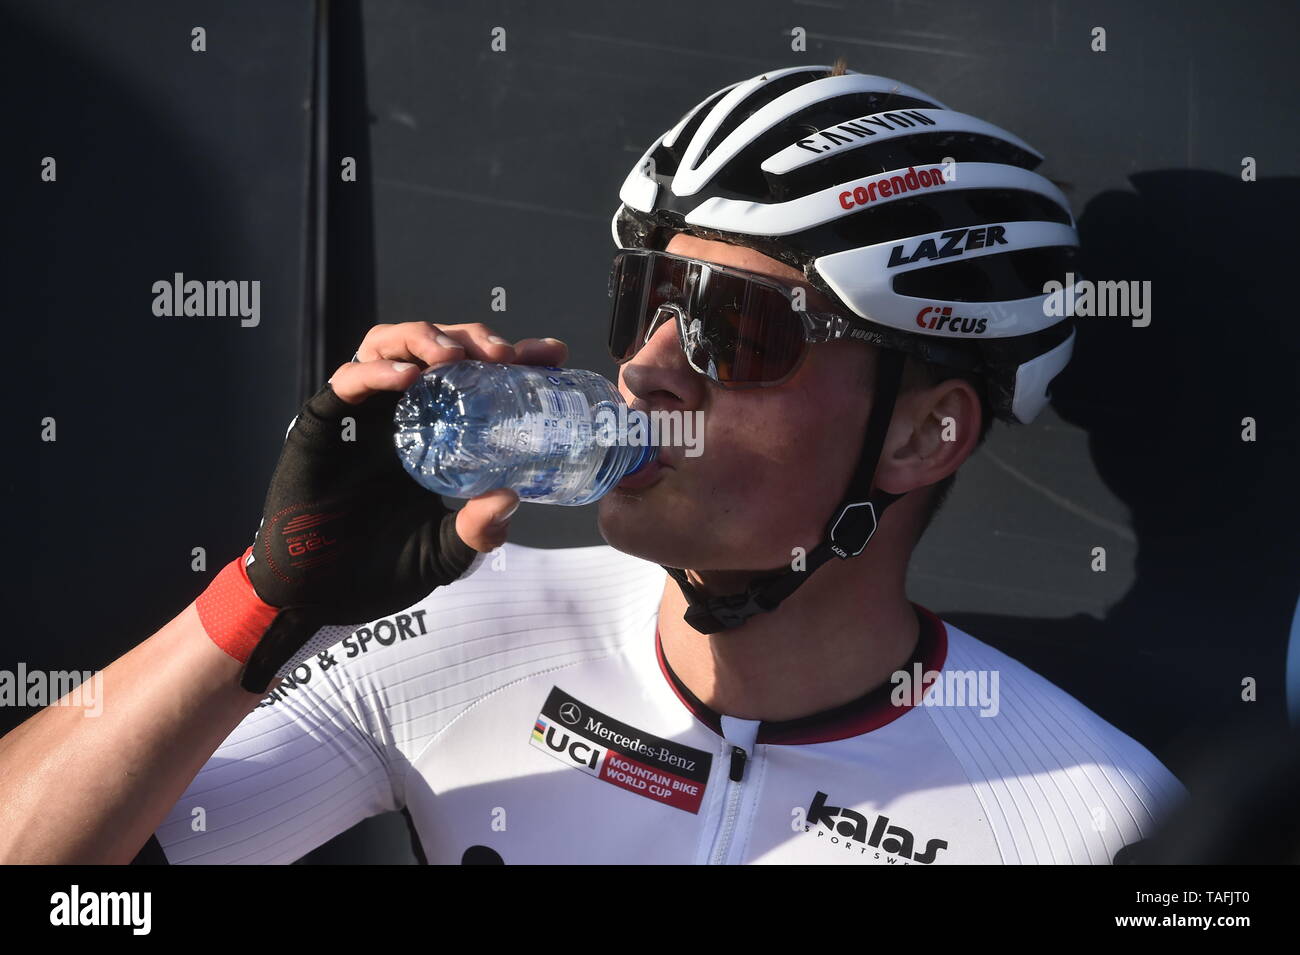 Winner Mathieu Van Der Poel Of Netherlands Drinks After The Men Elite Cross Country Mountain Bike World Cup Event In Nove Mesto Na Morave Czech Republic May 24 2019 Ctk Photo Lubos Pavlicek